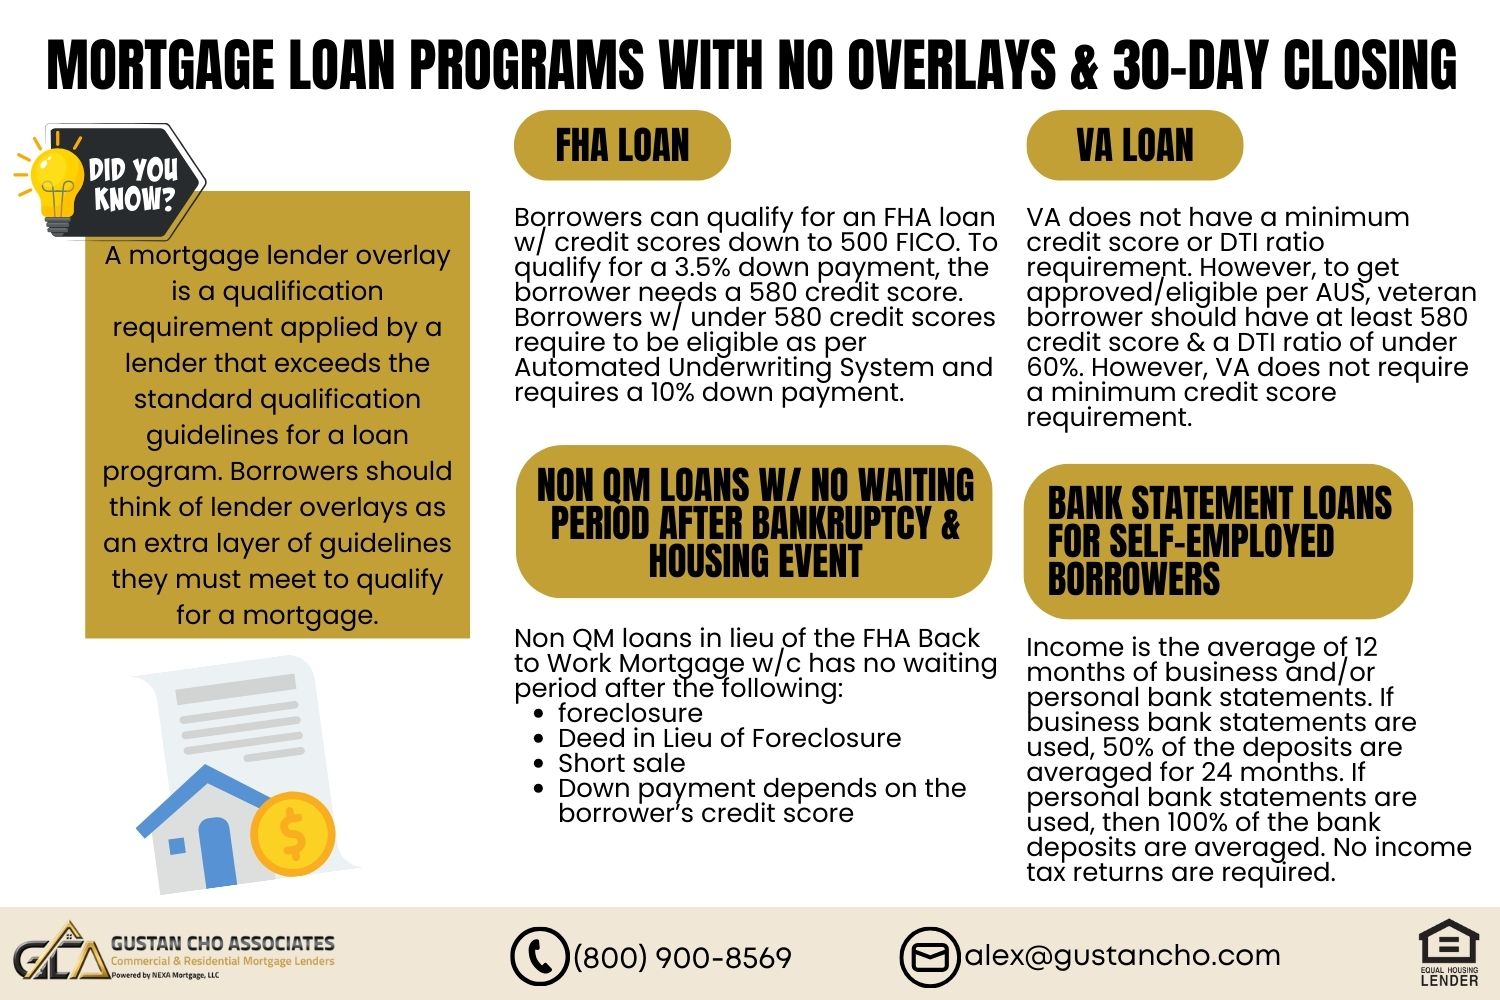 Mortgage Loan Programs With No Overlays and 30-Day Closing